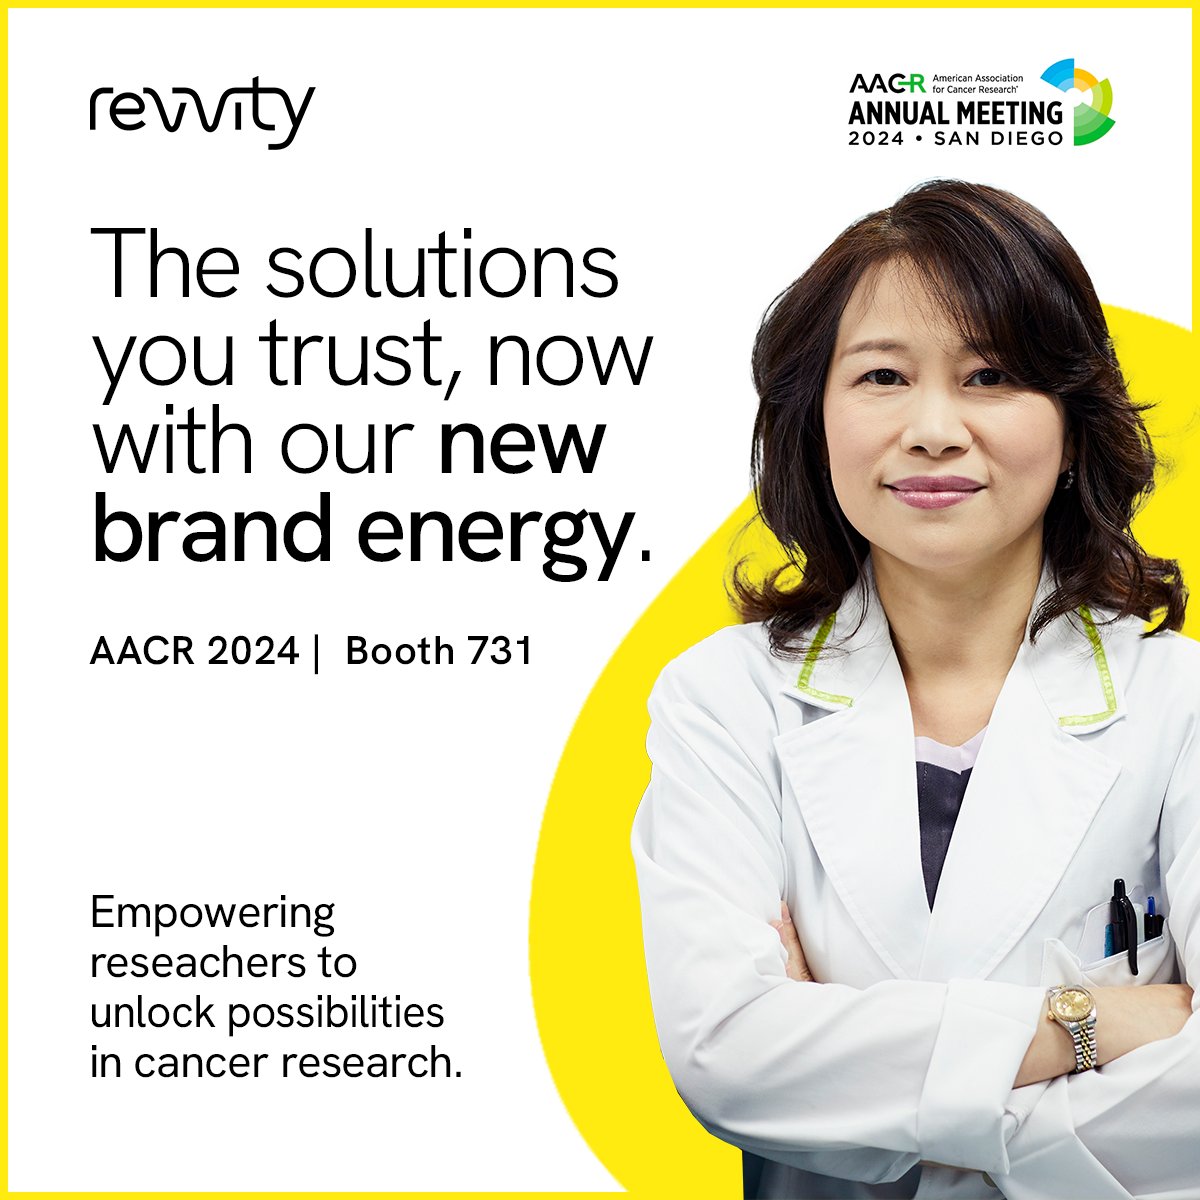 Solutions you trust — with new brand energy. We're excited to see you for our AACR debut as Revvity! Get a sneak peek. ms.spr.ly/6011c94hX #AACR24 #Revvity #RevvupResearch